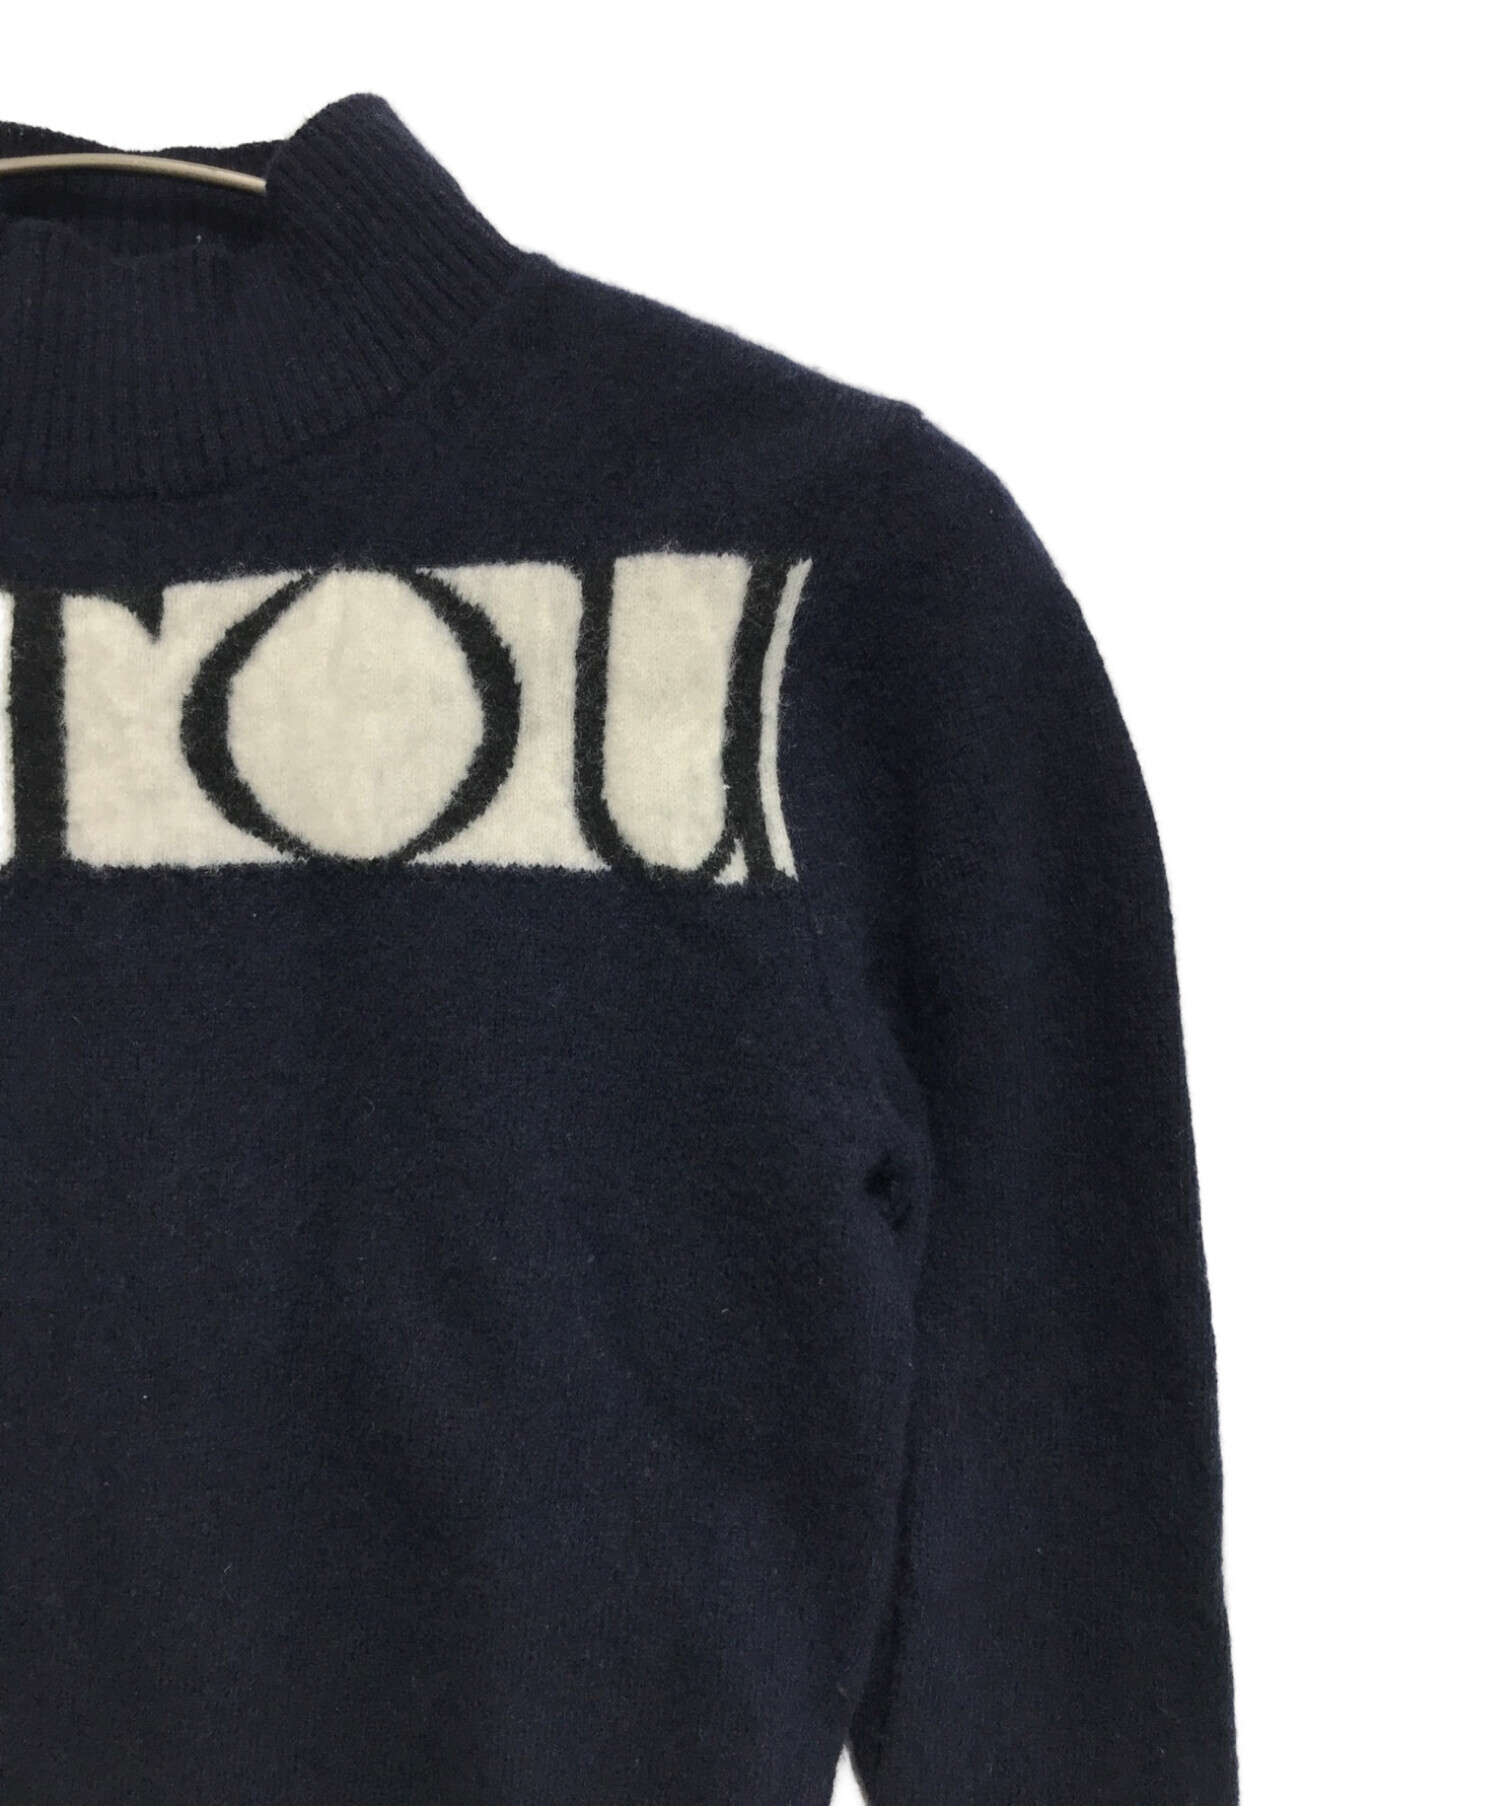 patou (パトゥ) Patou logo jumper in cashmere and wool ネイビー サイズ:S SIZE